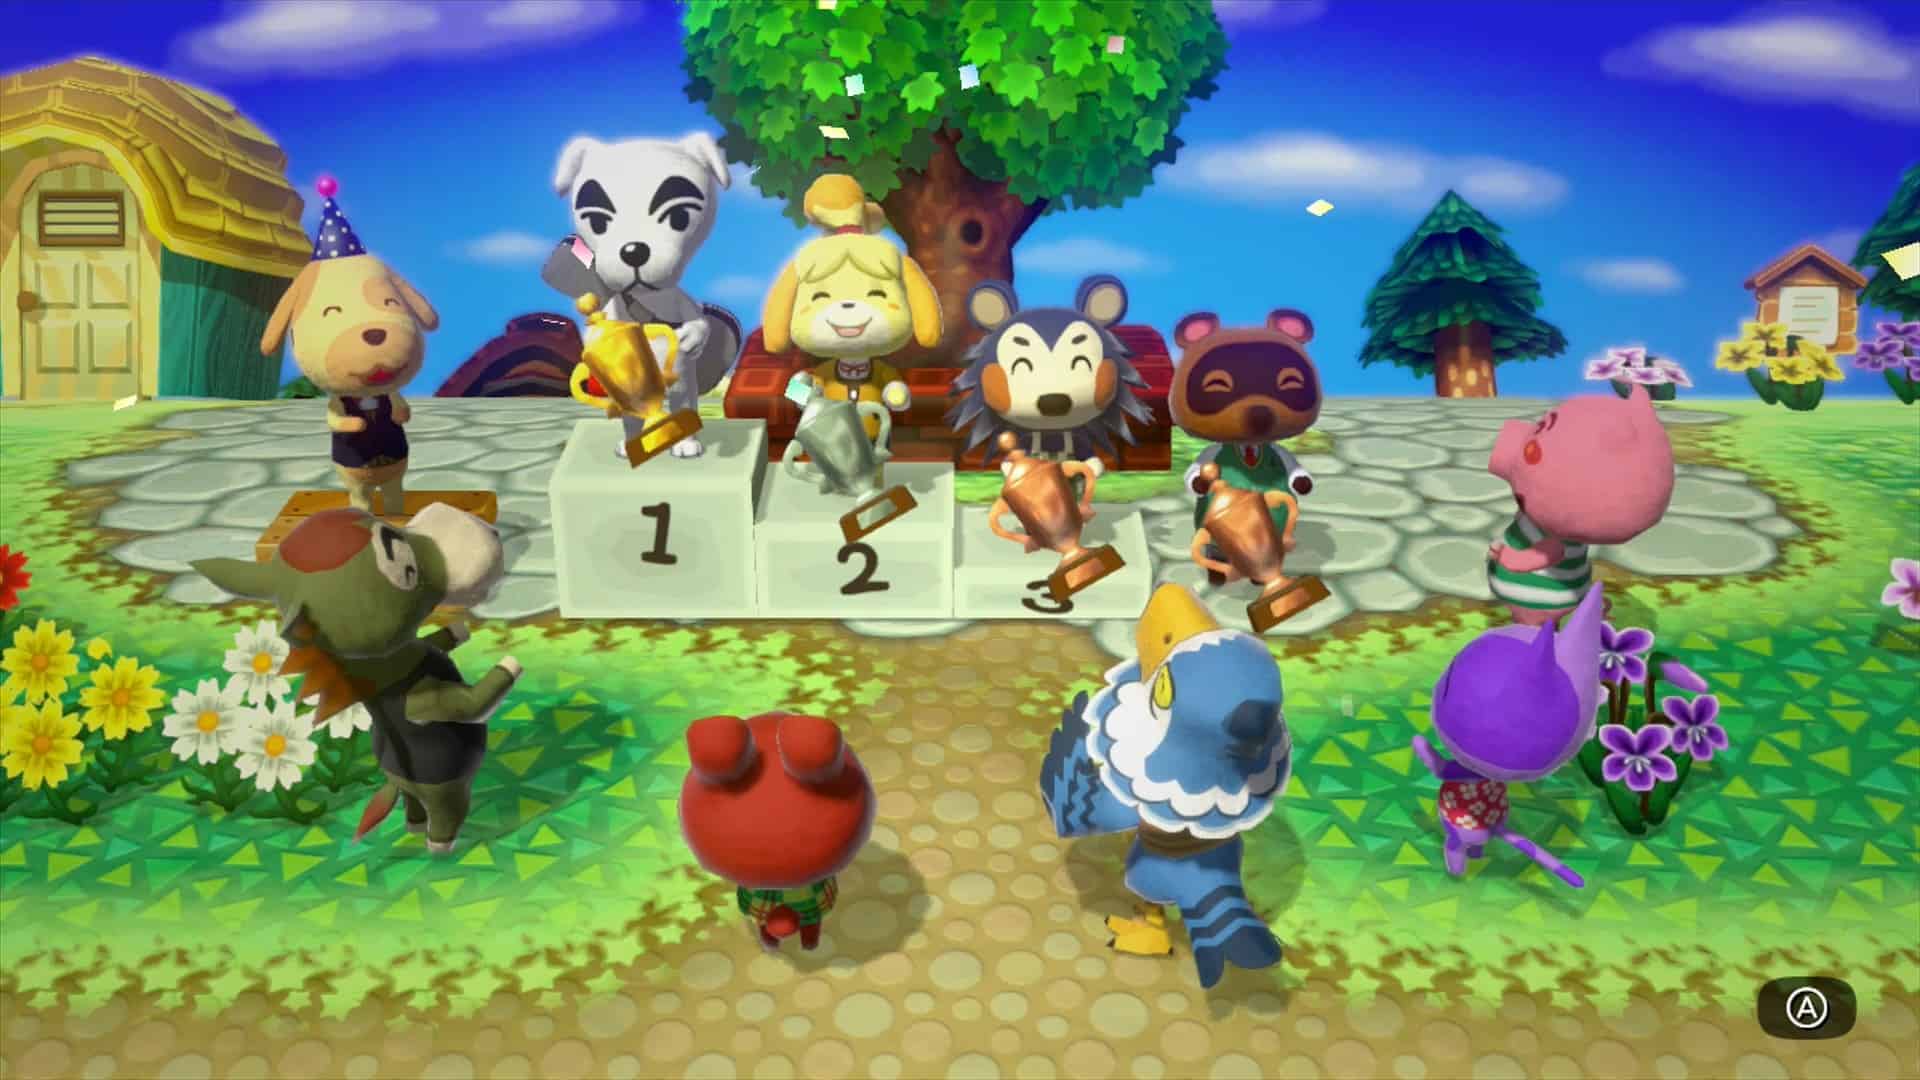 <p><em>Amiibo Festival</em> is another spin-off game in the Animal Crossing series. It is a board game-style virtual game similar to Nintendo's <em>Mario Party</em>. It dropped on Wii U in 2015 from developed Nintendo EAD. Tom Nook, Isabelle, and many other familiar characters are playable with a corresponding amiibo figure.</p>    <p>The game is a board game where players choose a character and try to reach the end of the board first. This goal is accomplished by competing in various mini-games to advance your character's position. The game includes many characters, but only one amiibo figure is required to play. Other players can use multiple villagers provided in the game as characters without needing a physical amiibo figure.</p>    <p>The game is centered around the amiibo figures Nintendo focused on across many games for a time. The more figures you purchase, the more characters you can play as in the game. Fans generally do not like this game as it is somewhat dull and too focused on buying amiibos.</p><p>Want to see more content like this on your Microsoft Start page?</p> <p>Simply click “Follow” near the headline of this article.</p> <p>After that, be sure to let us know what you think about this content in the comments!</p>